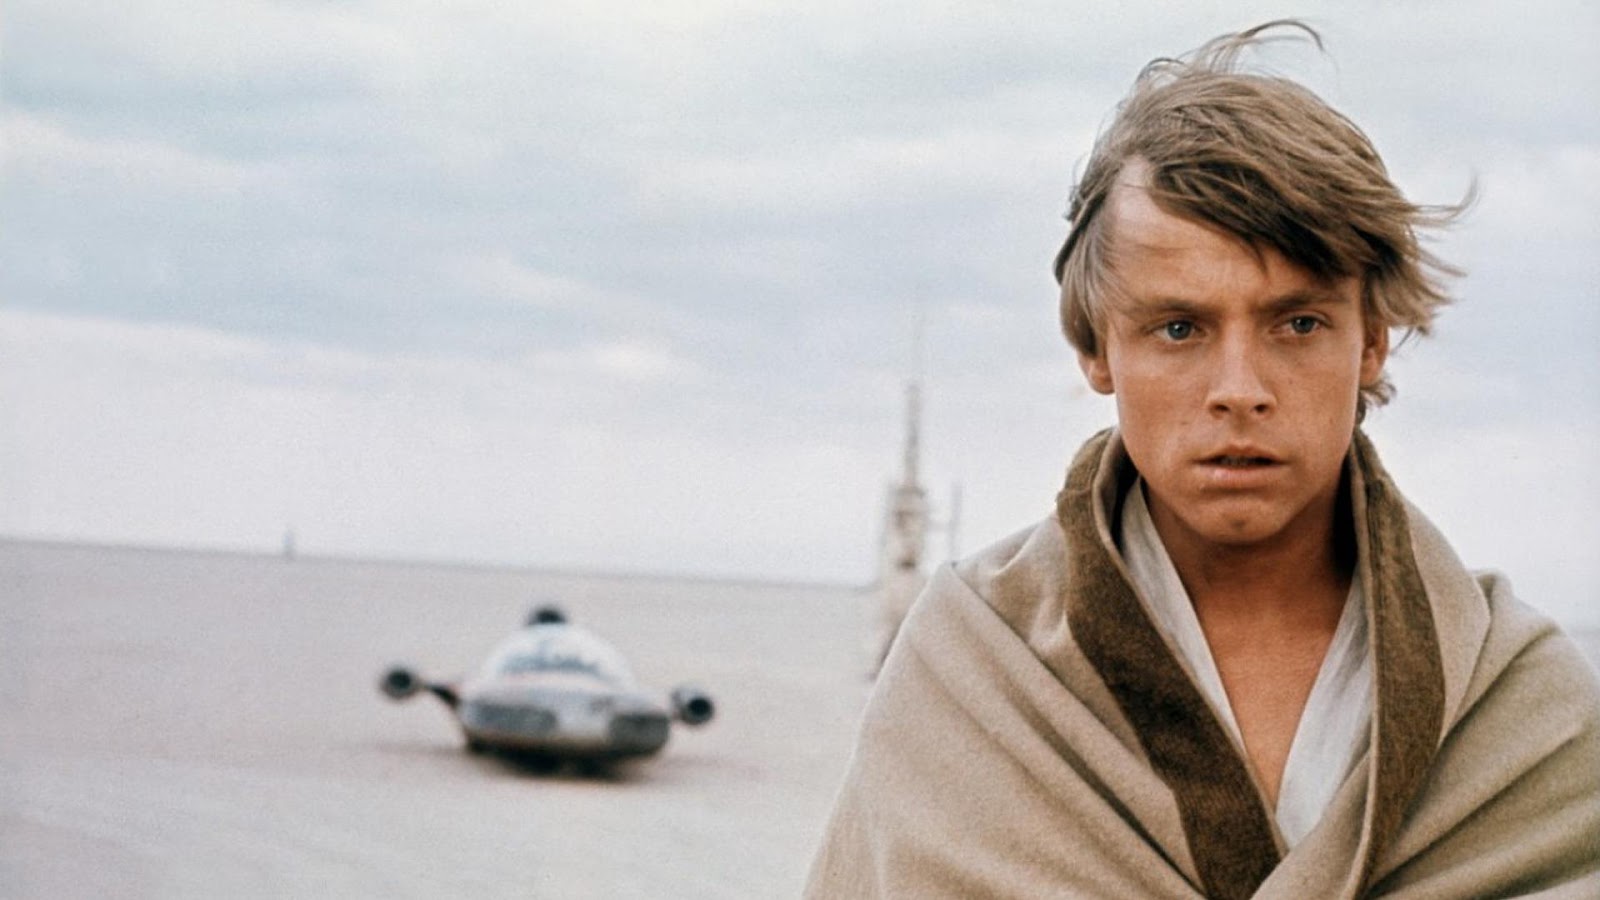 Mark Hamill has advice for Star Wars fans but will they listen?